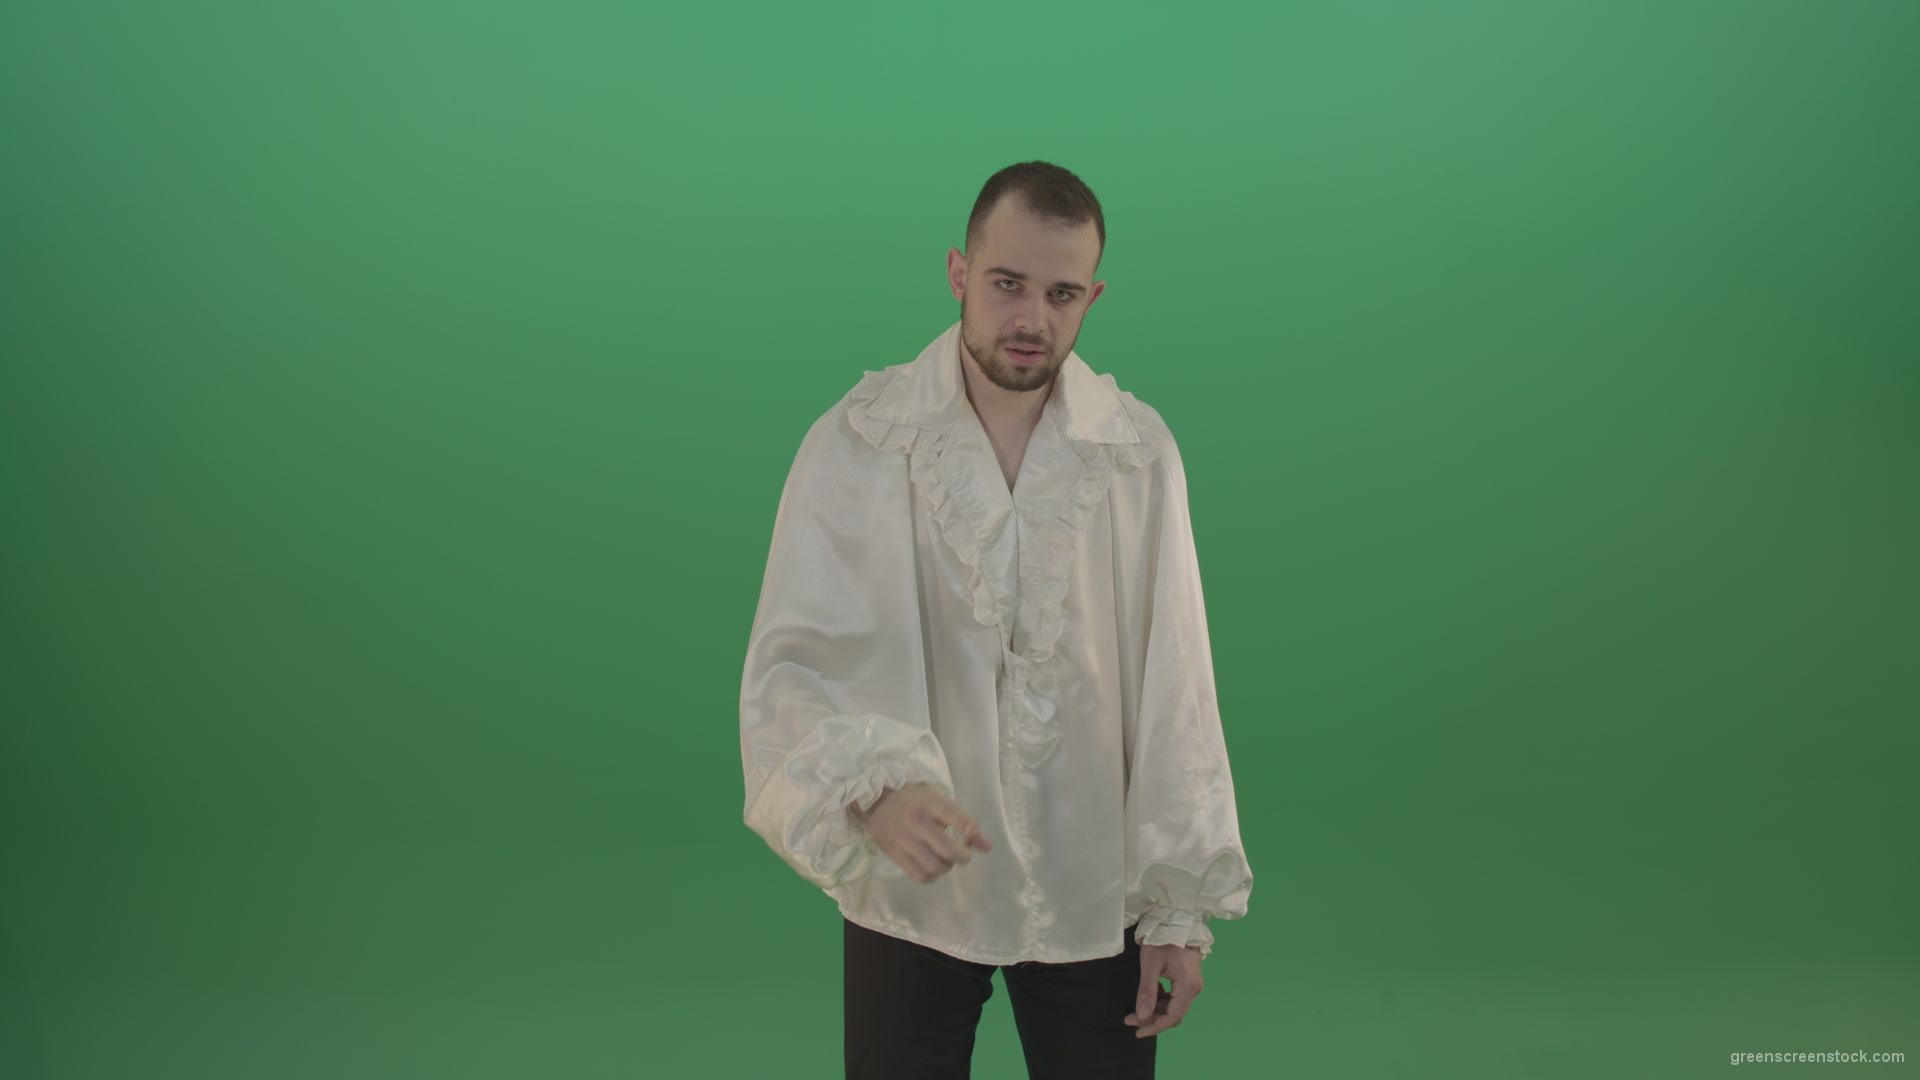 Maniac-man-was-very-angry-asking-for-silence-showing-sign-isolated-in-green-screen-studio_009 Green Screen Stock